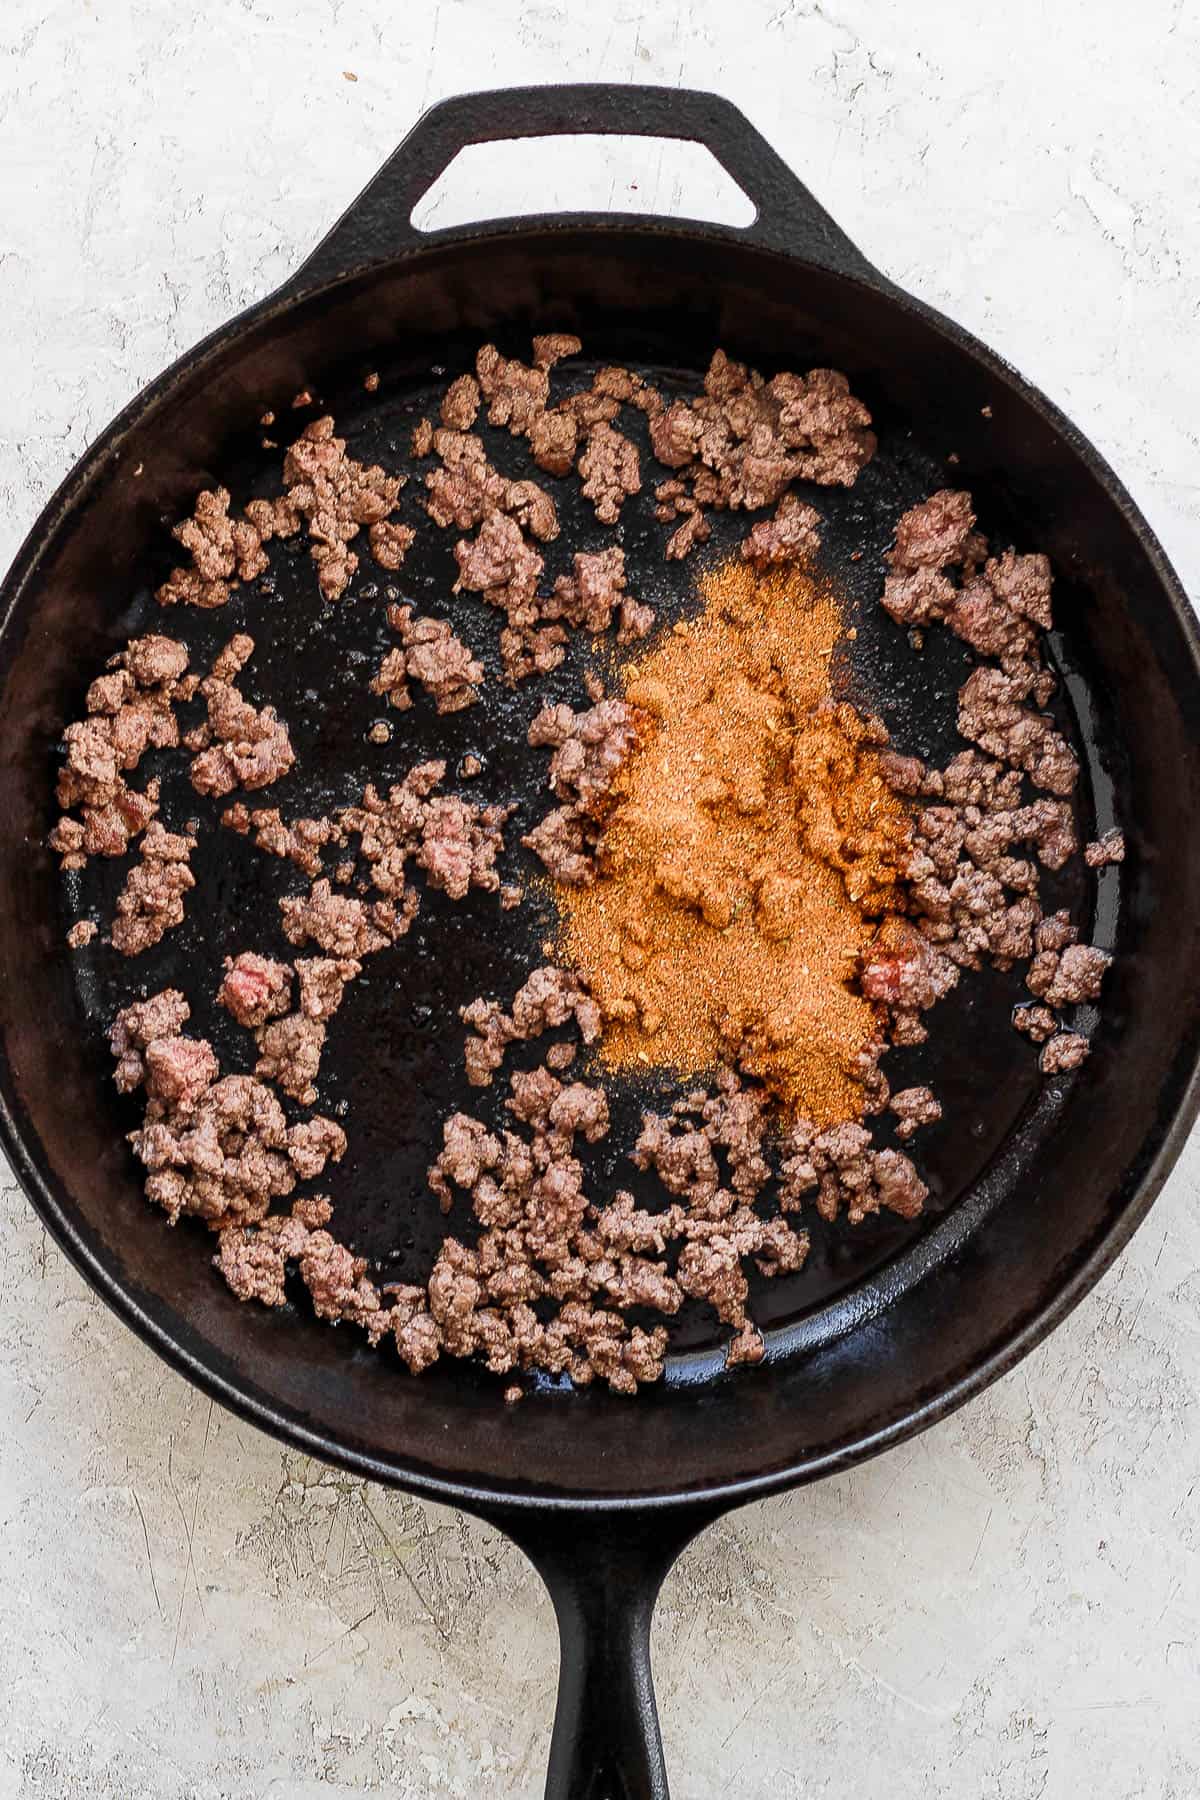 Ground beef and taco seasoning in a cast iron skillet.